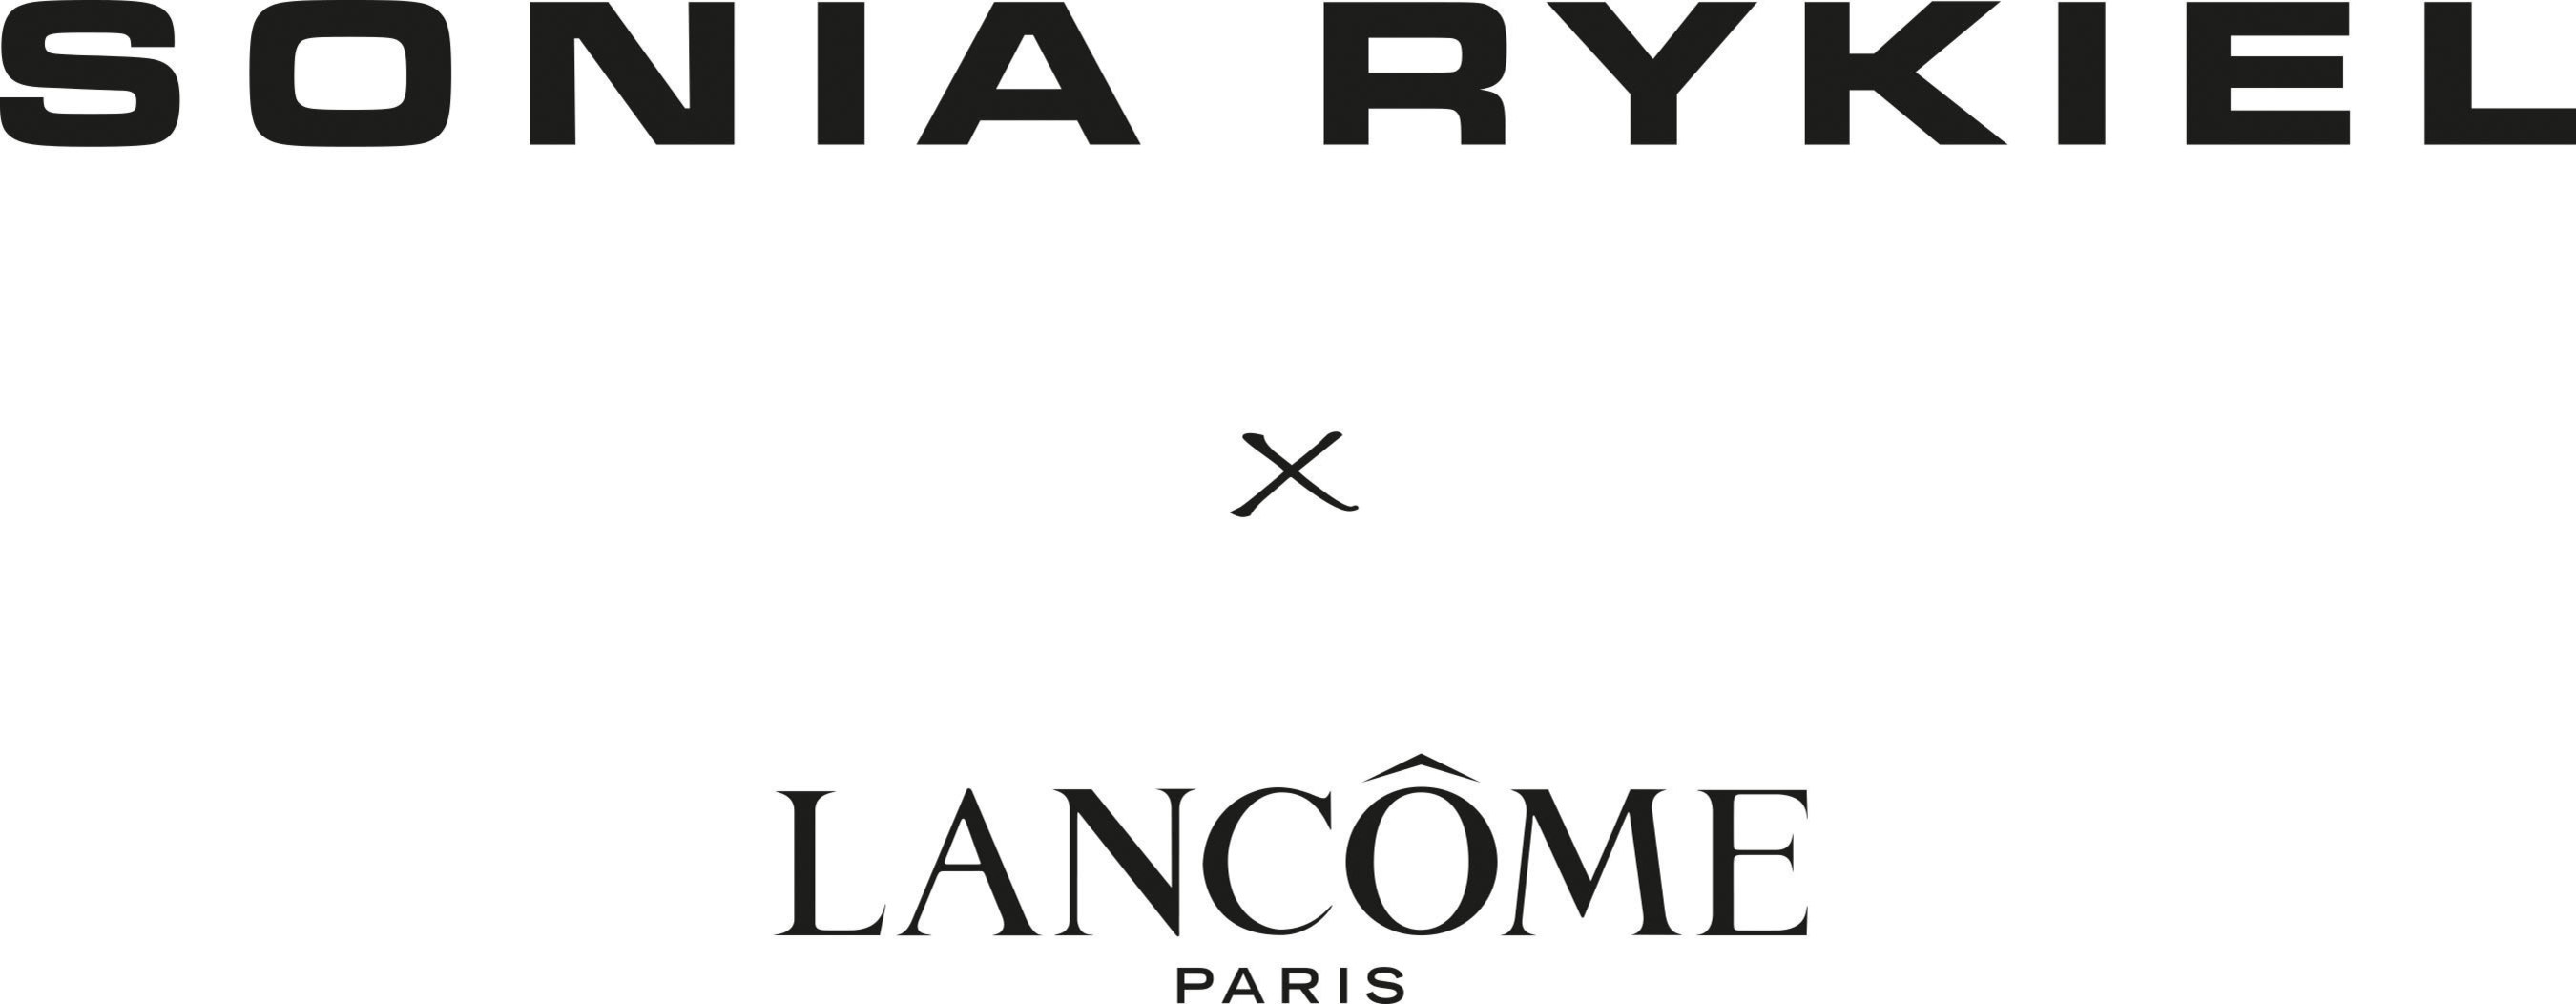 Sonia Rykiel x Lancome collaborate for a limited-edition Fall 2016 make-up collection